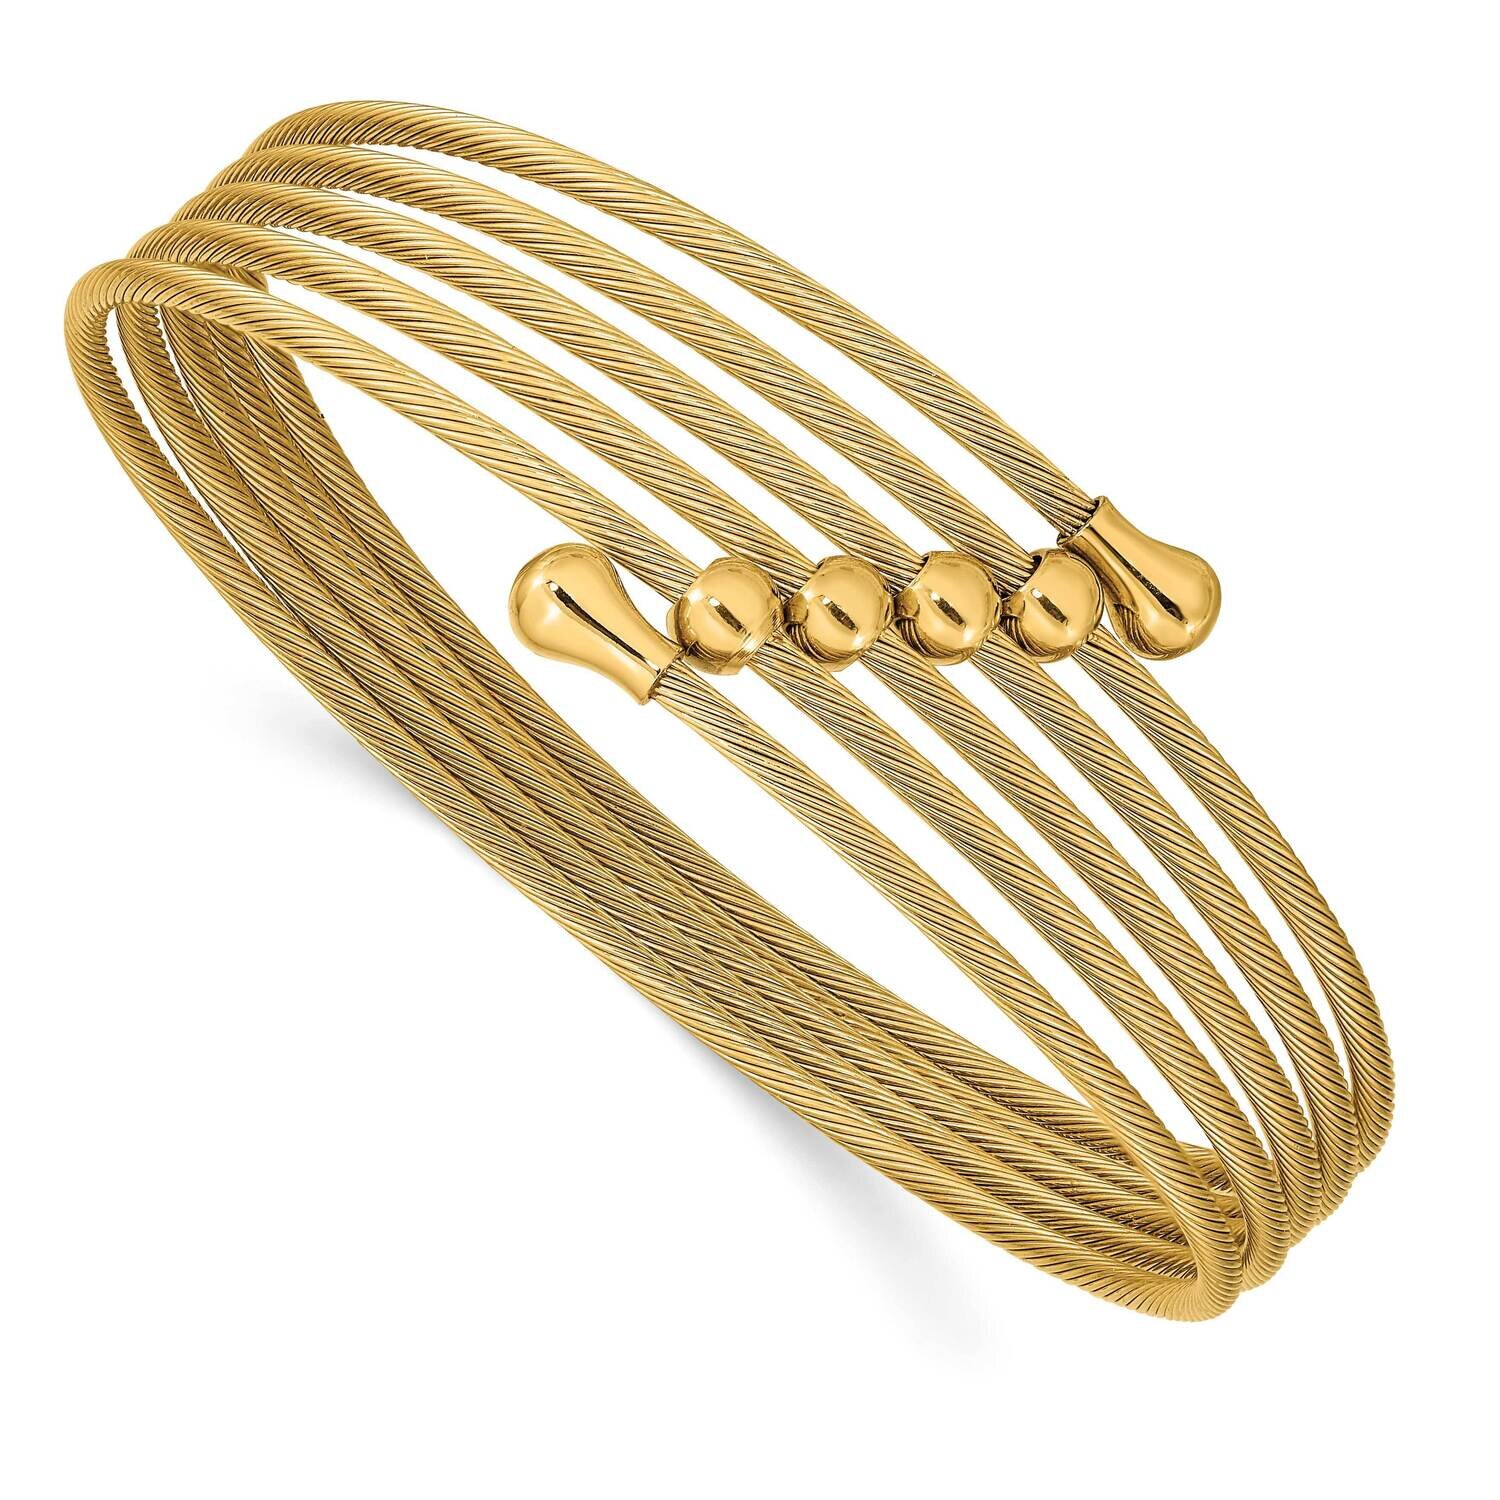 Yellow Ip-Plated Flexible Coil Bangle Stainless Steel Polished SRB2603